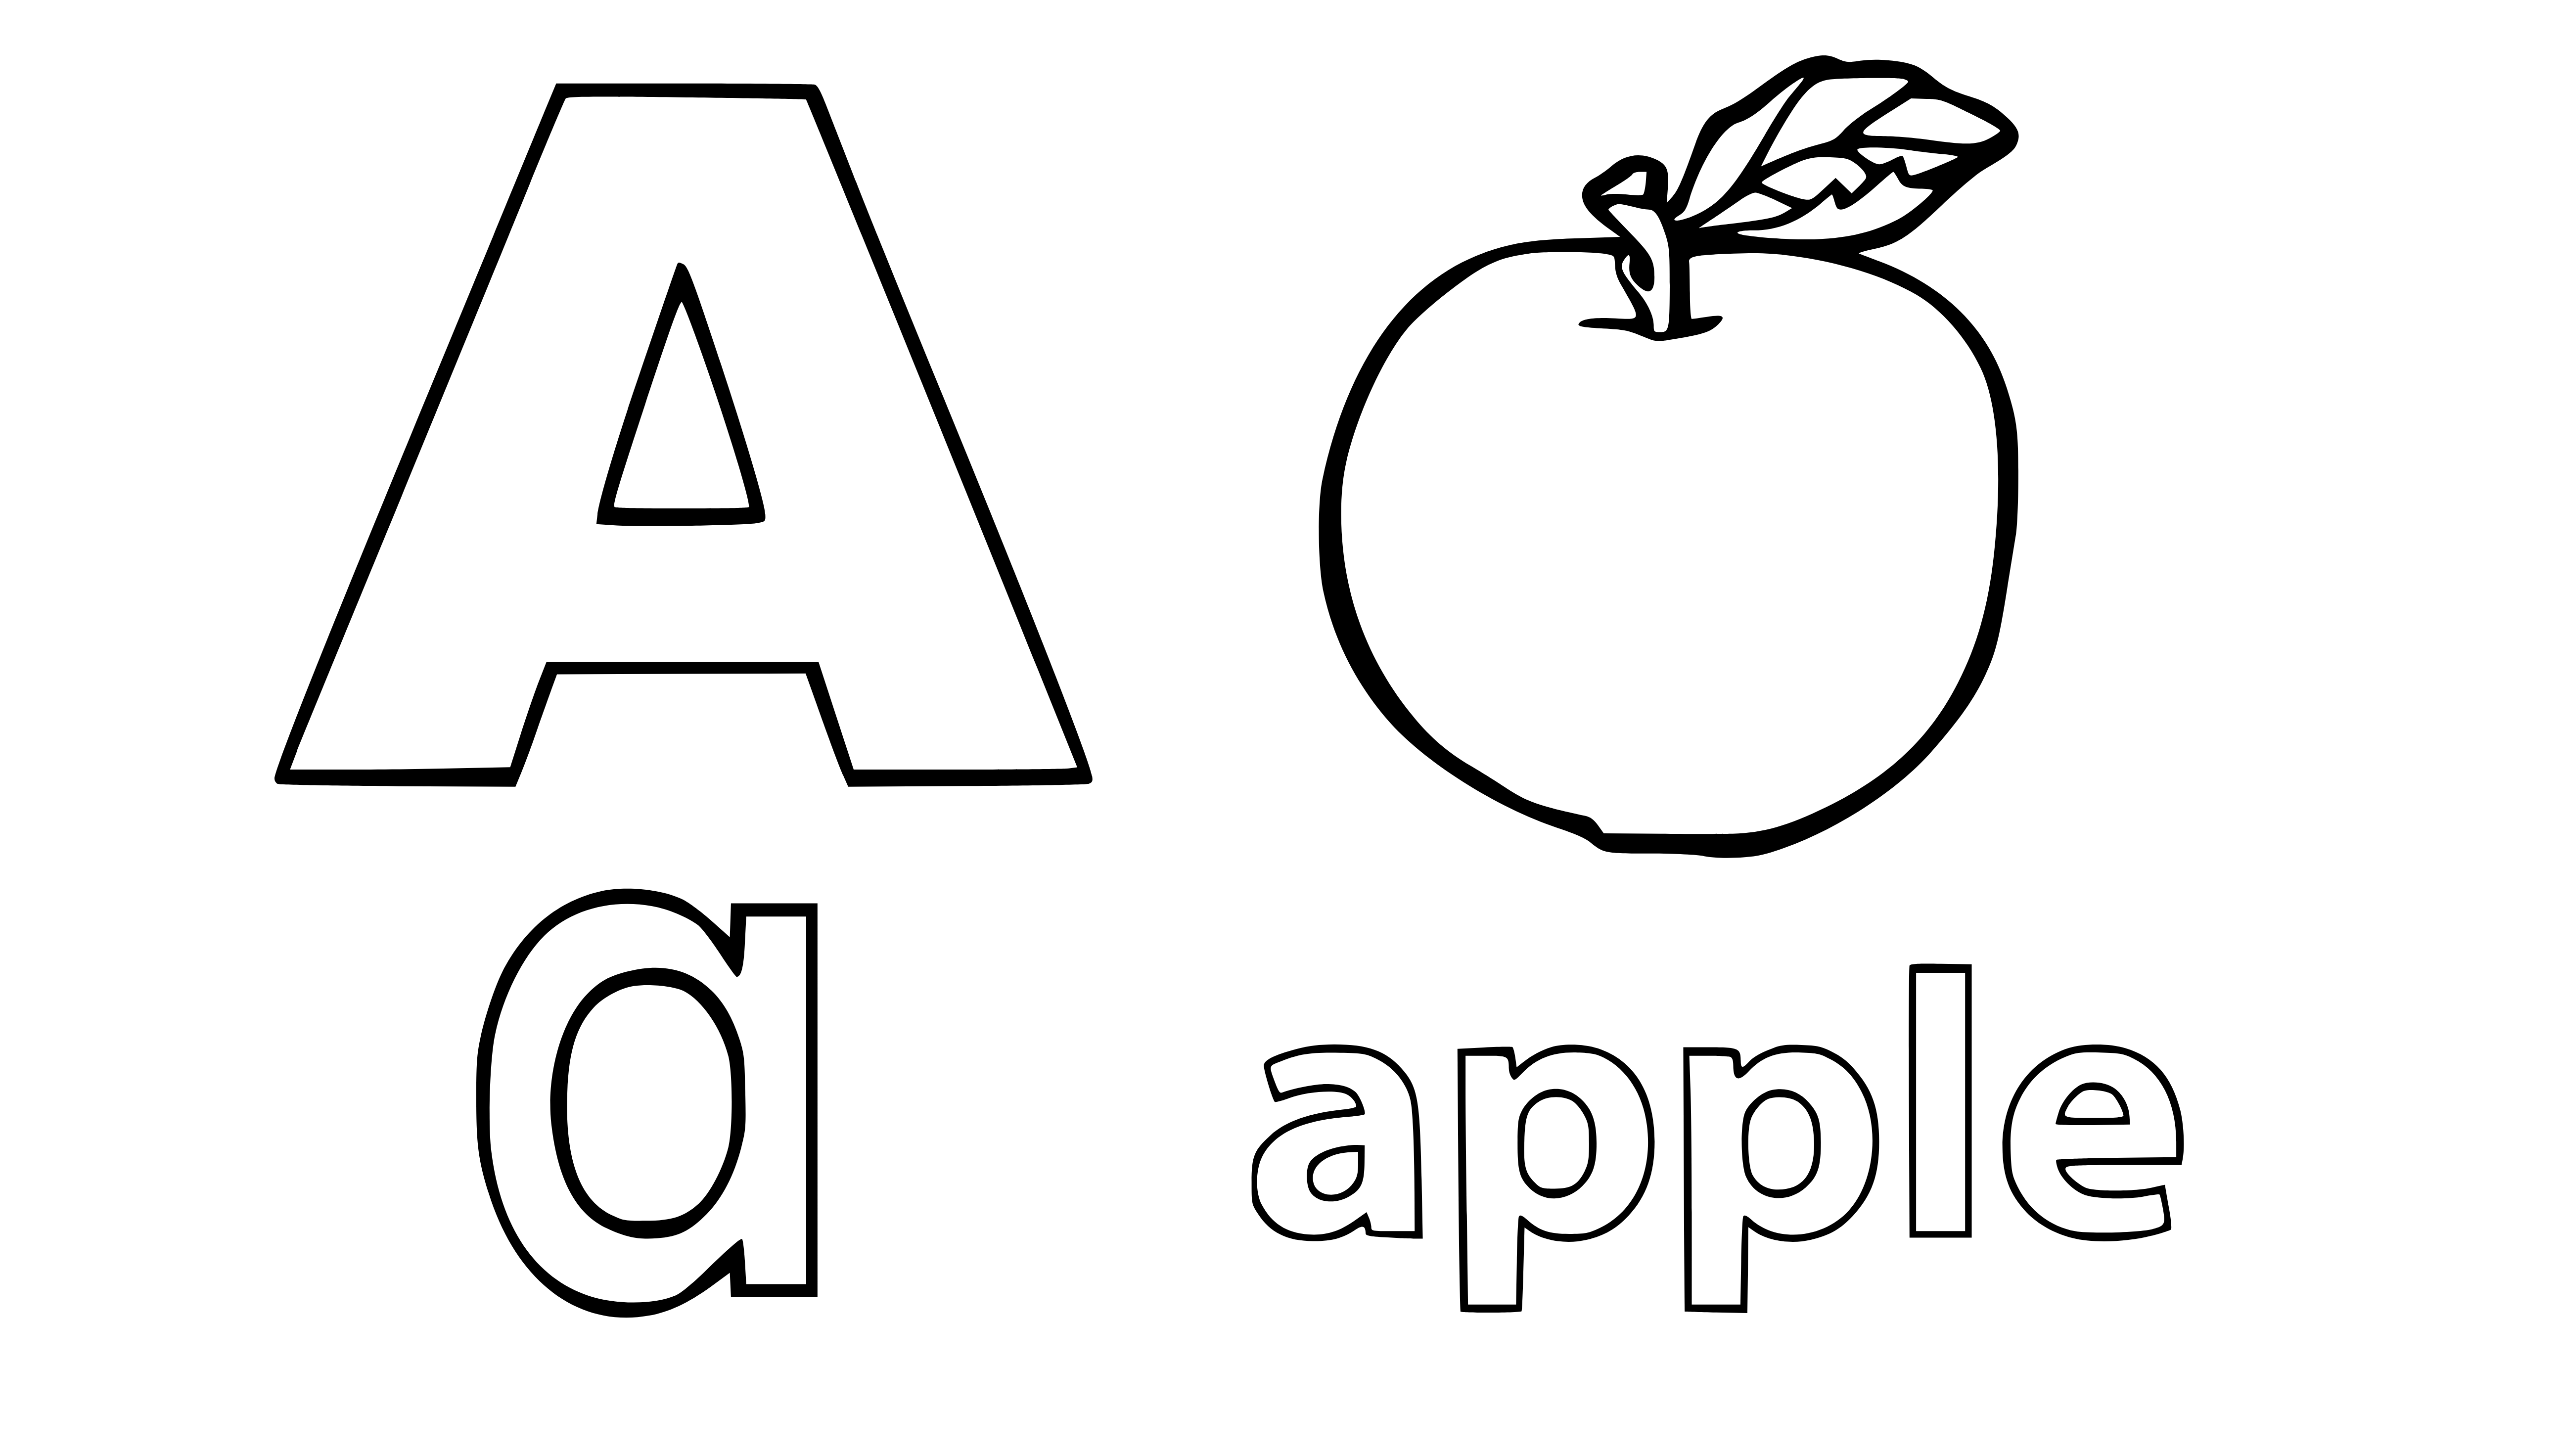 Letter A Coloring Page (a for apple) - SheetalColor.com